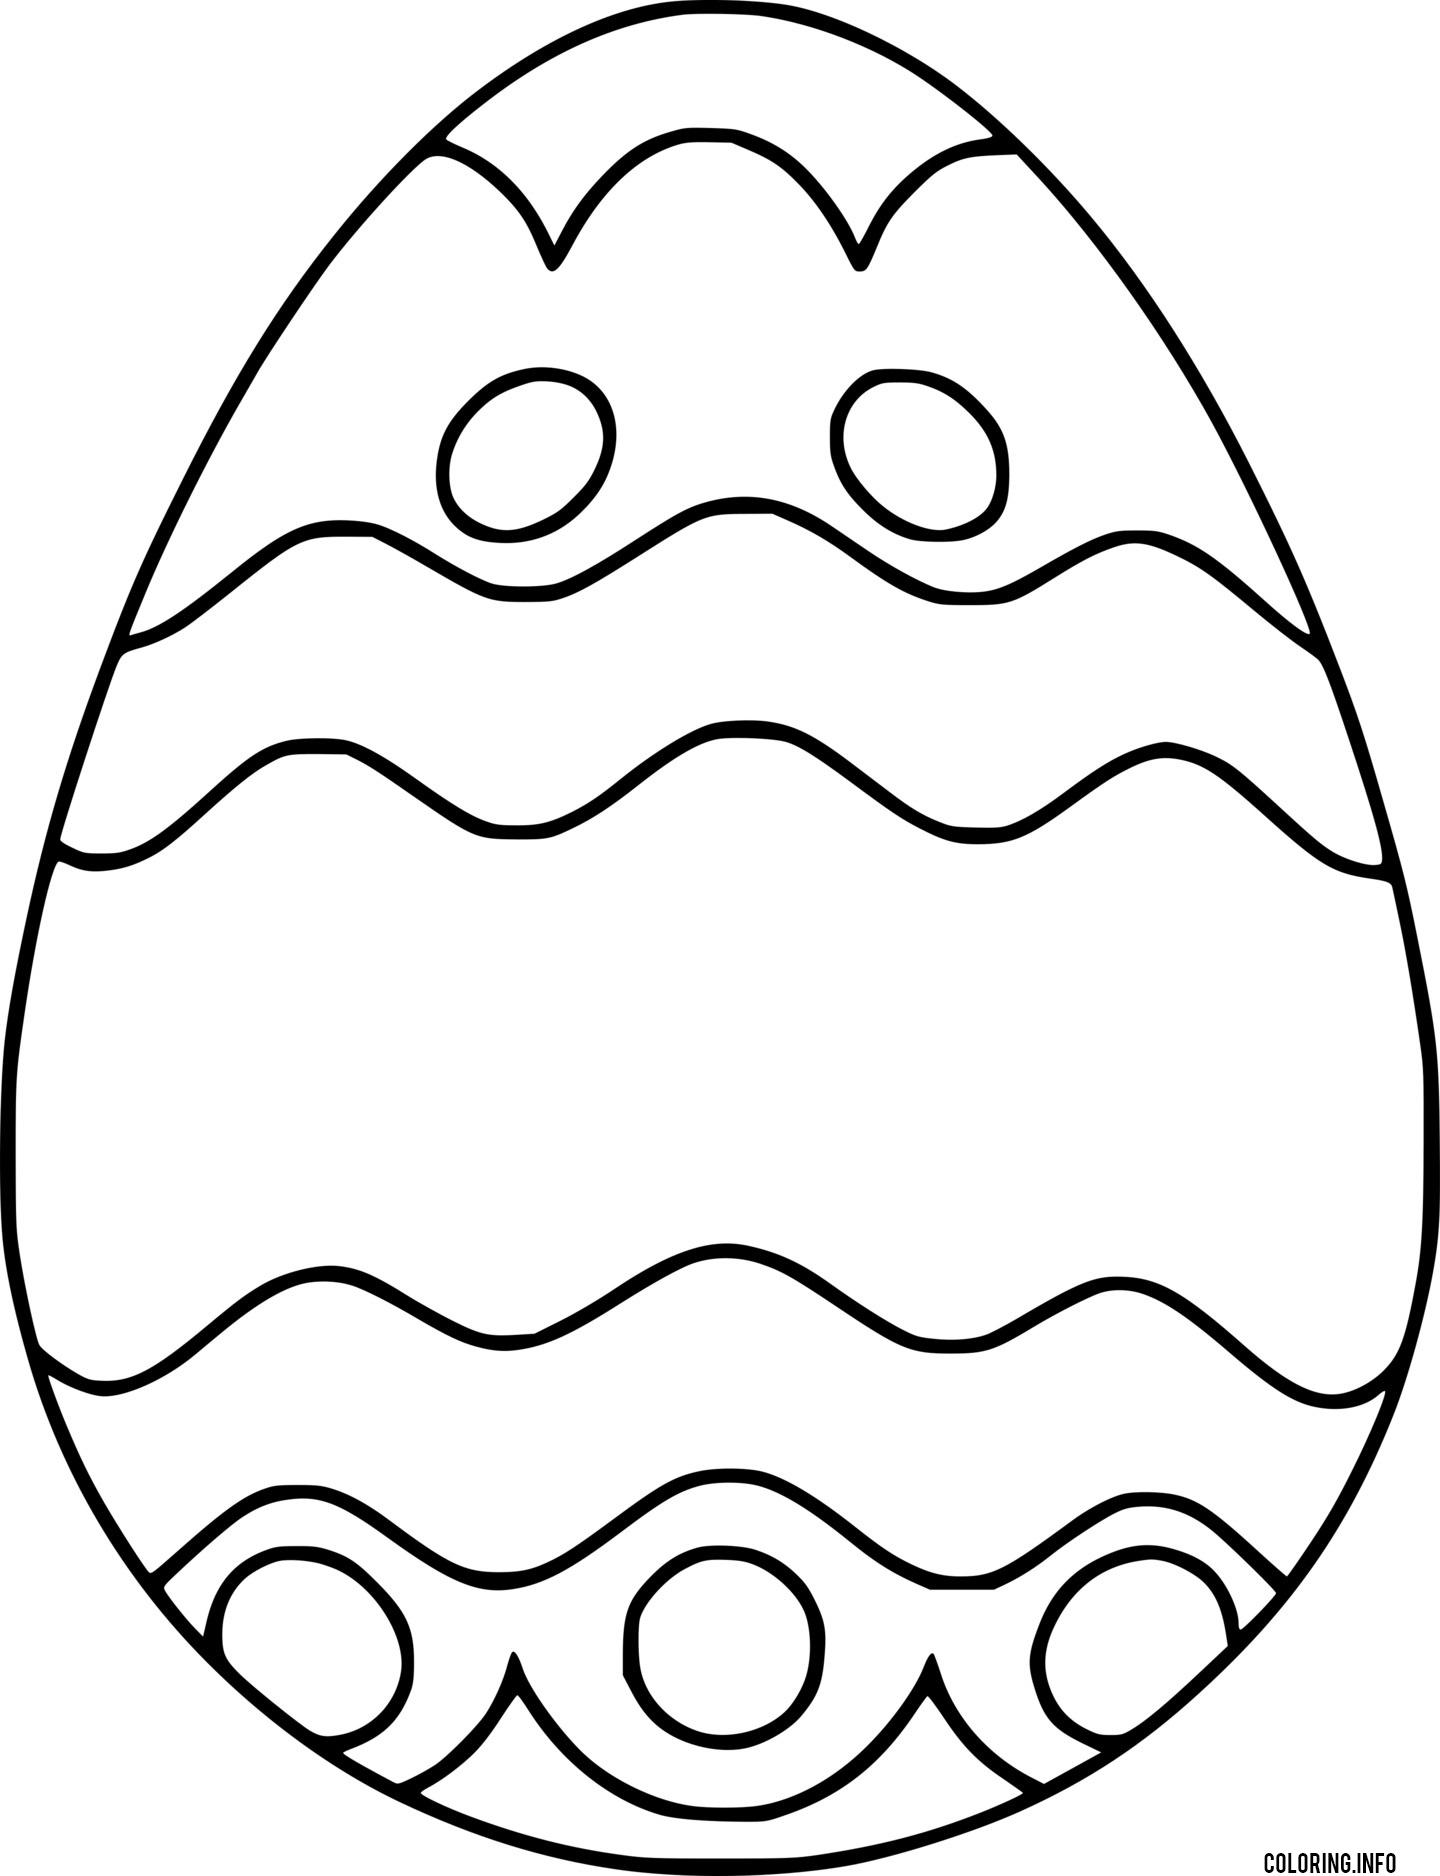 Easter Egg With Break Line And Circle Patterns coloring